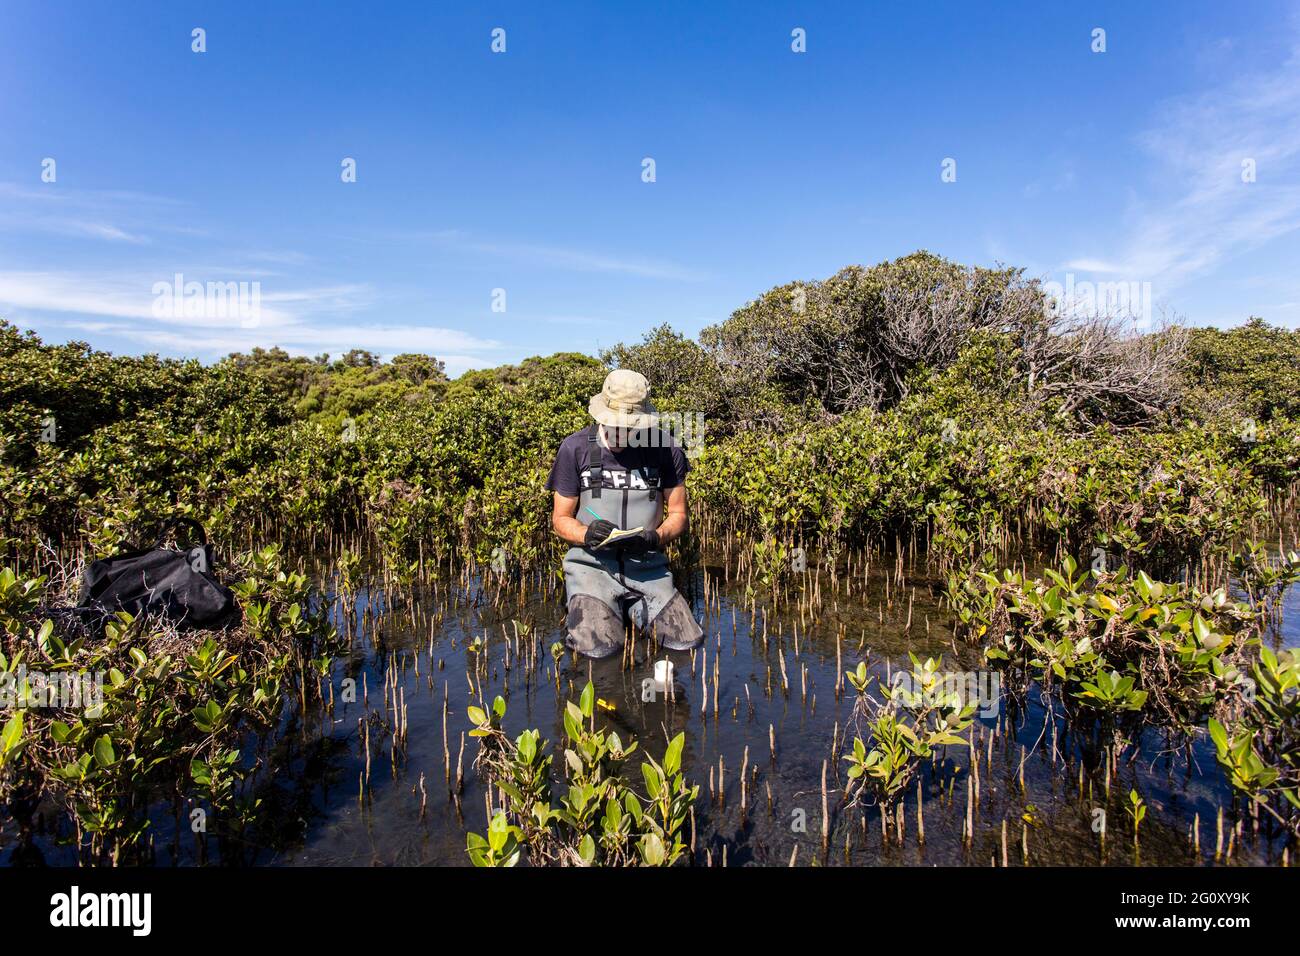 Scientist collecting a sediment core to asses carbon sequestration rates in the sediment of mangroves. Stock Photo